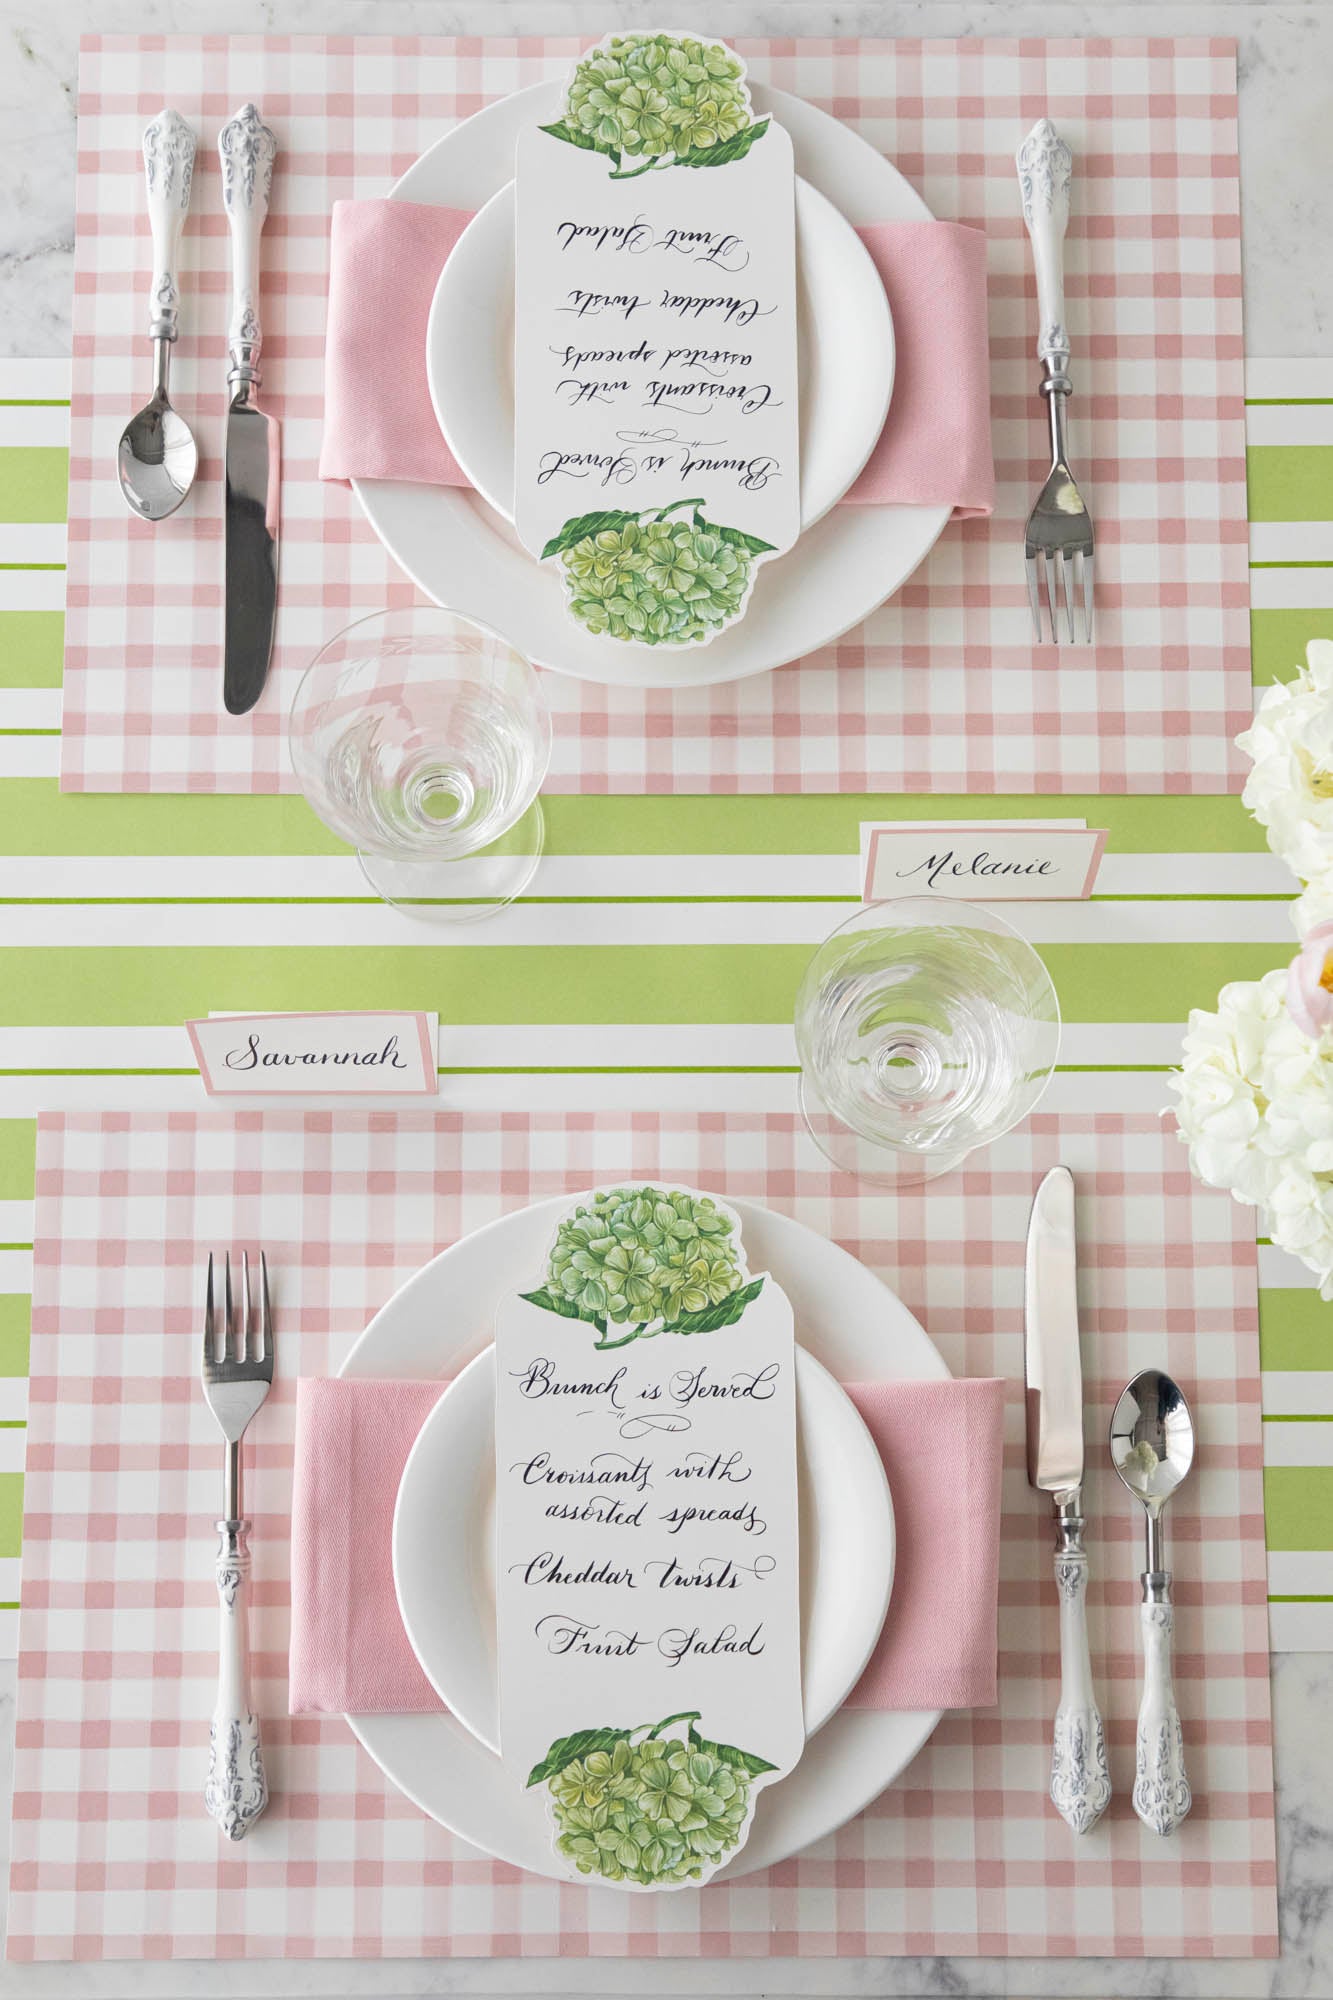 A Pink Painted Check Placemat with a Hester &amp; Cook place card on a pink check-patterned paper placemat, perfect for a social gathering.